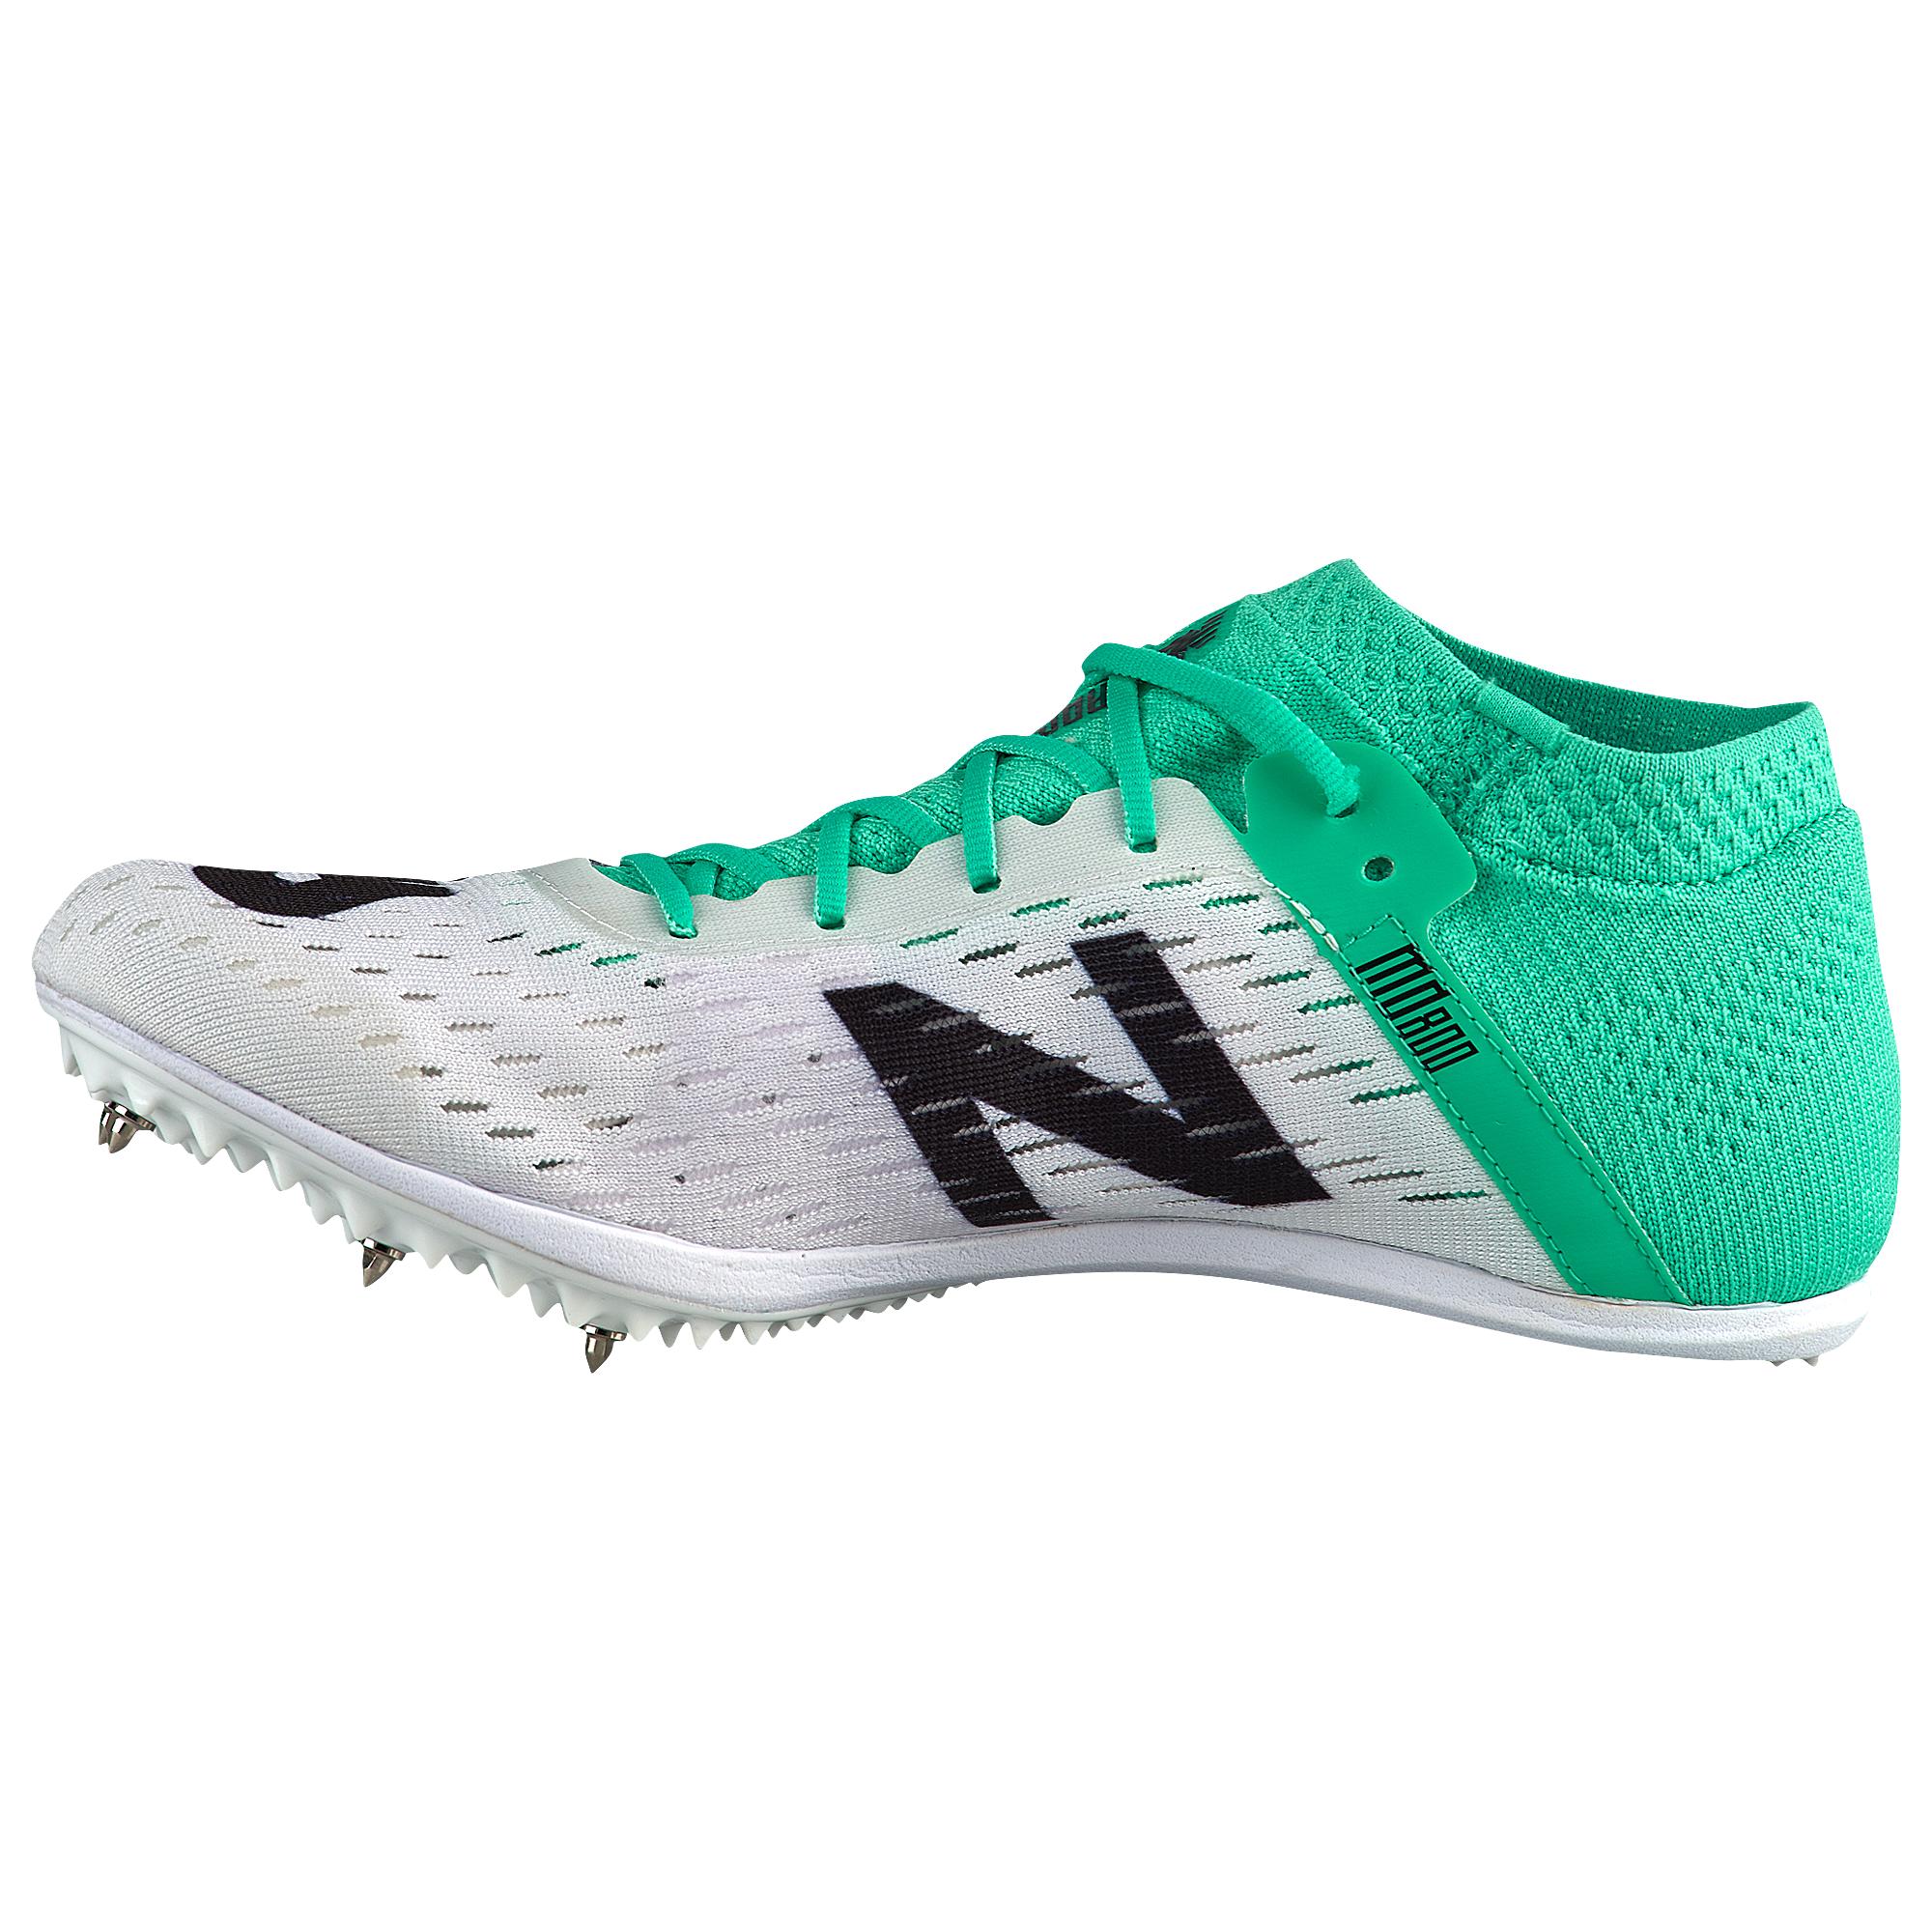 new balance mid distance track spikes